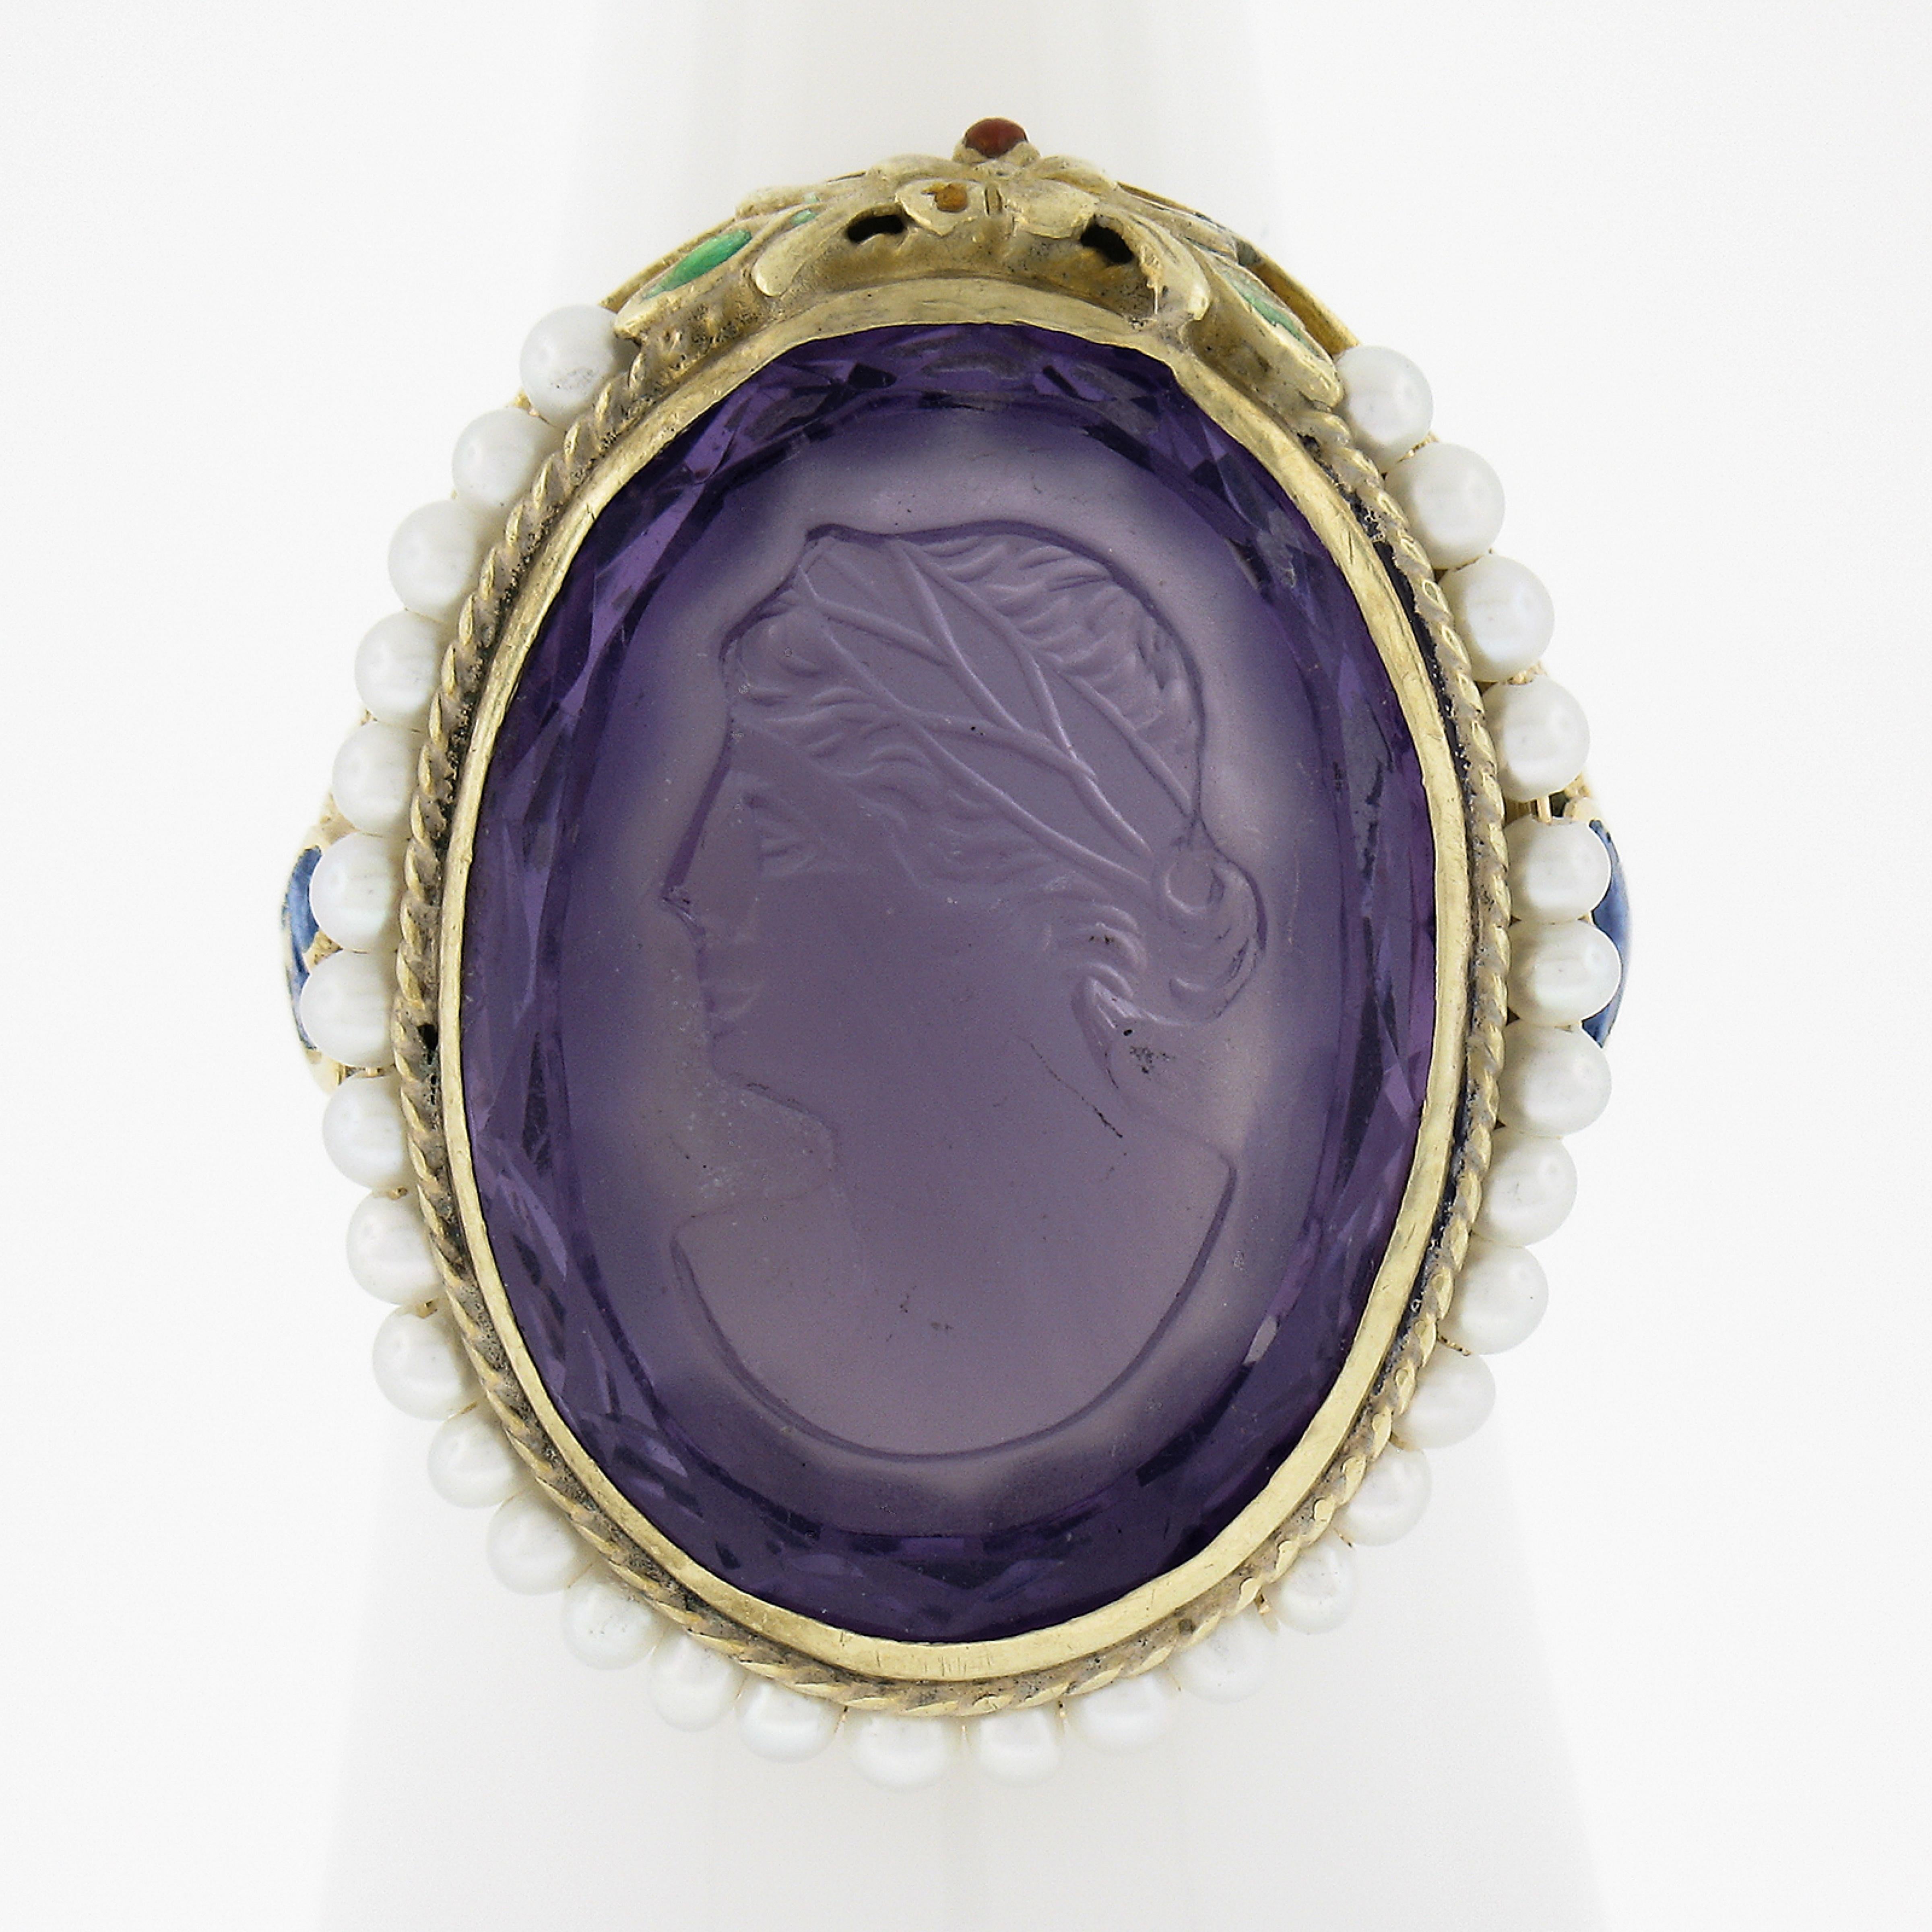 --Stone(s):--
(1) Natural Genuine Amethyst - Carved Cameo Oval Cut - Bezel Set - Medium Purple Color - 21.2x15.6mm (approx.)
Numerous Cultured Seed Pearls - Round Shape - Wire Set - White Color - 1.8mm each (approx.)

Material: Solid 18k Yellow